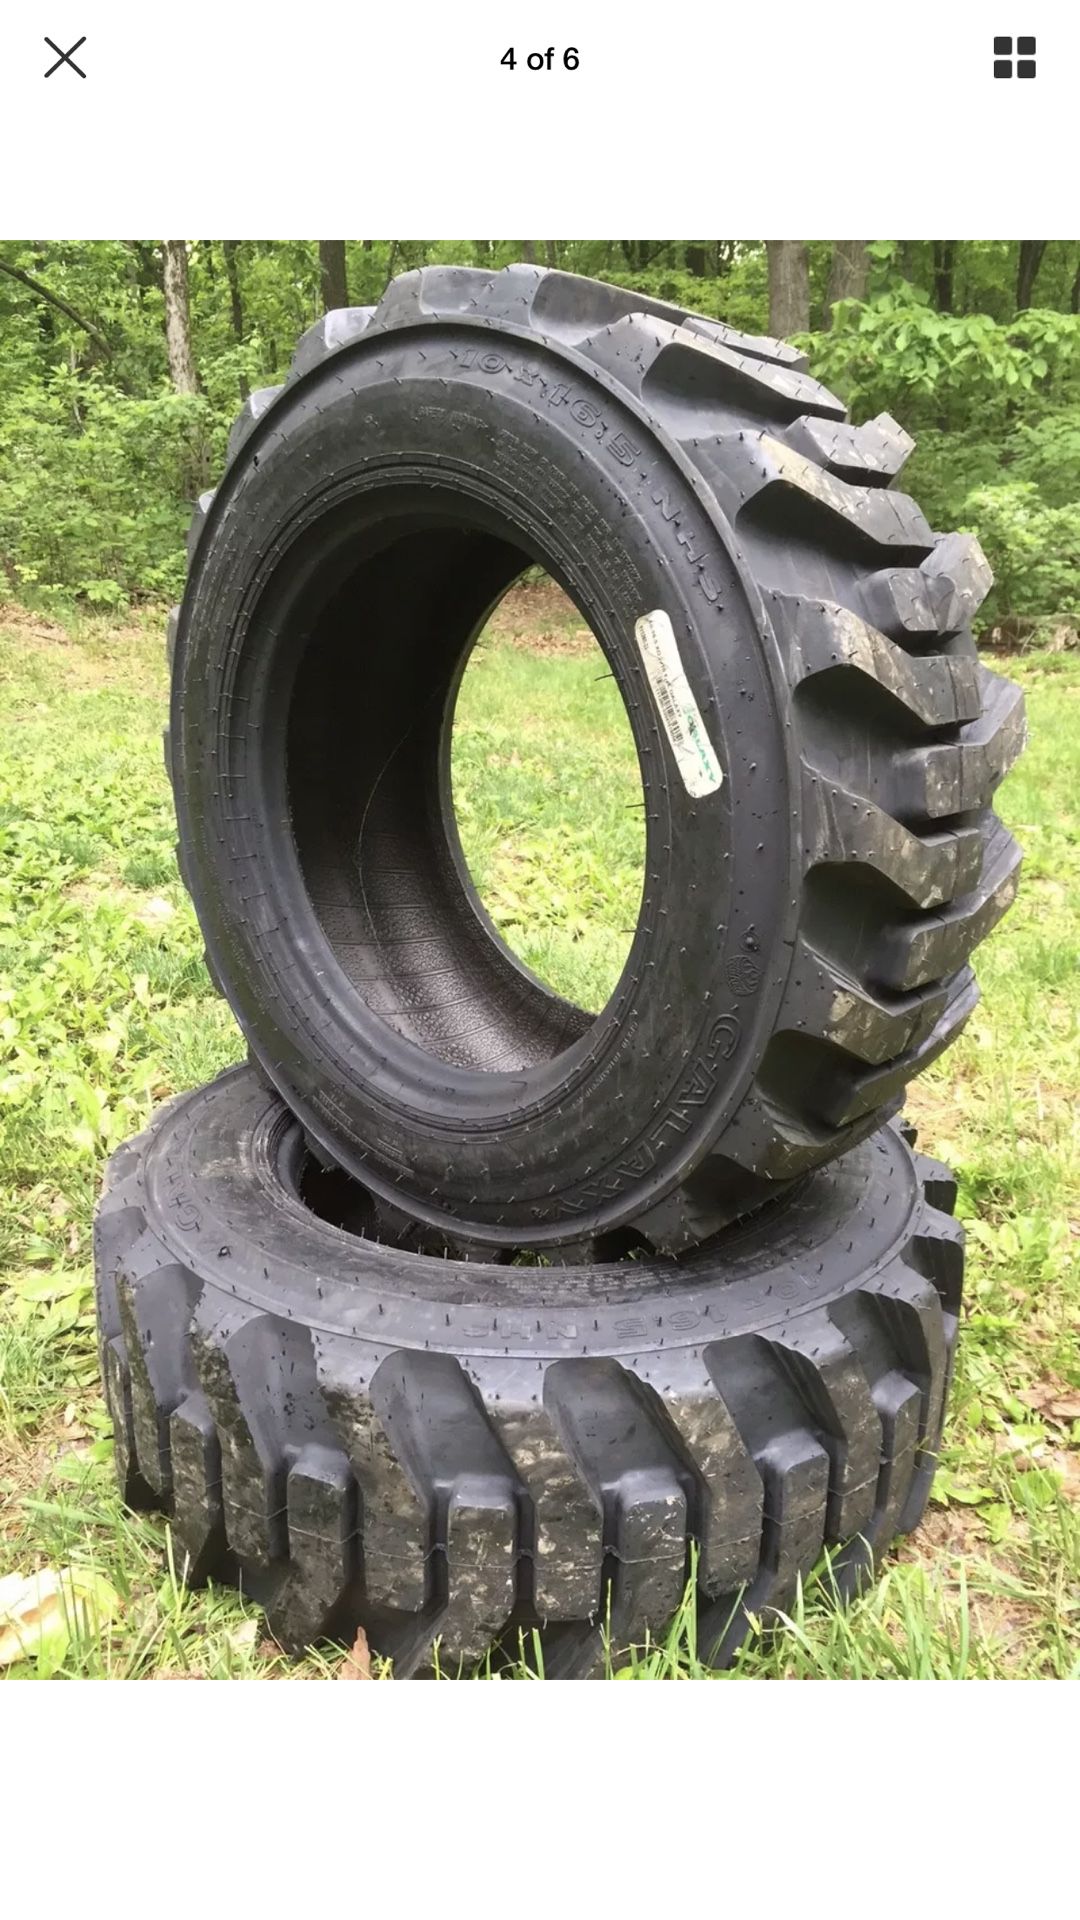 4x NEW 10-16.5 12 ply Skid steer tires - 10X16.5 no bargain price firm $425